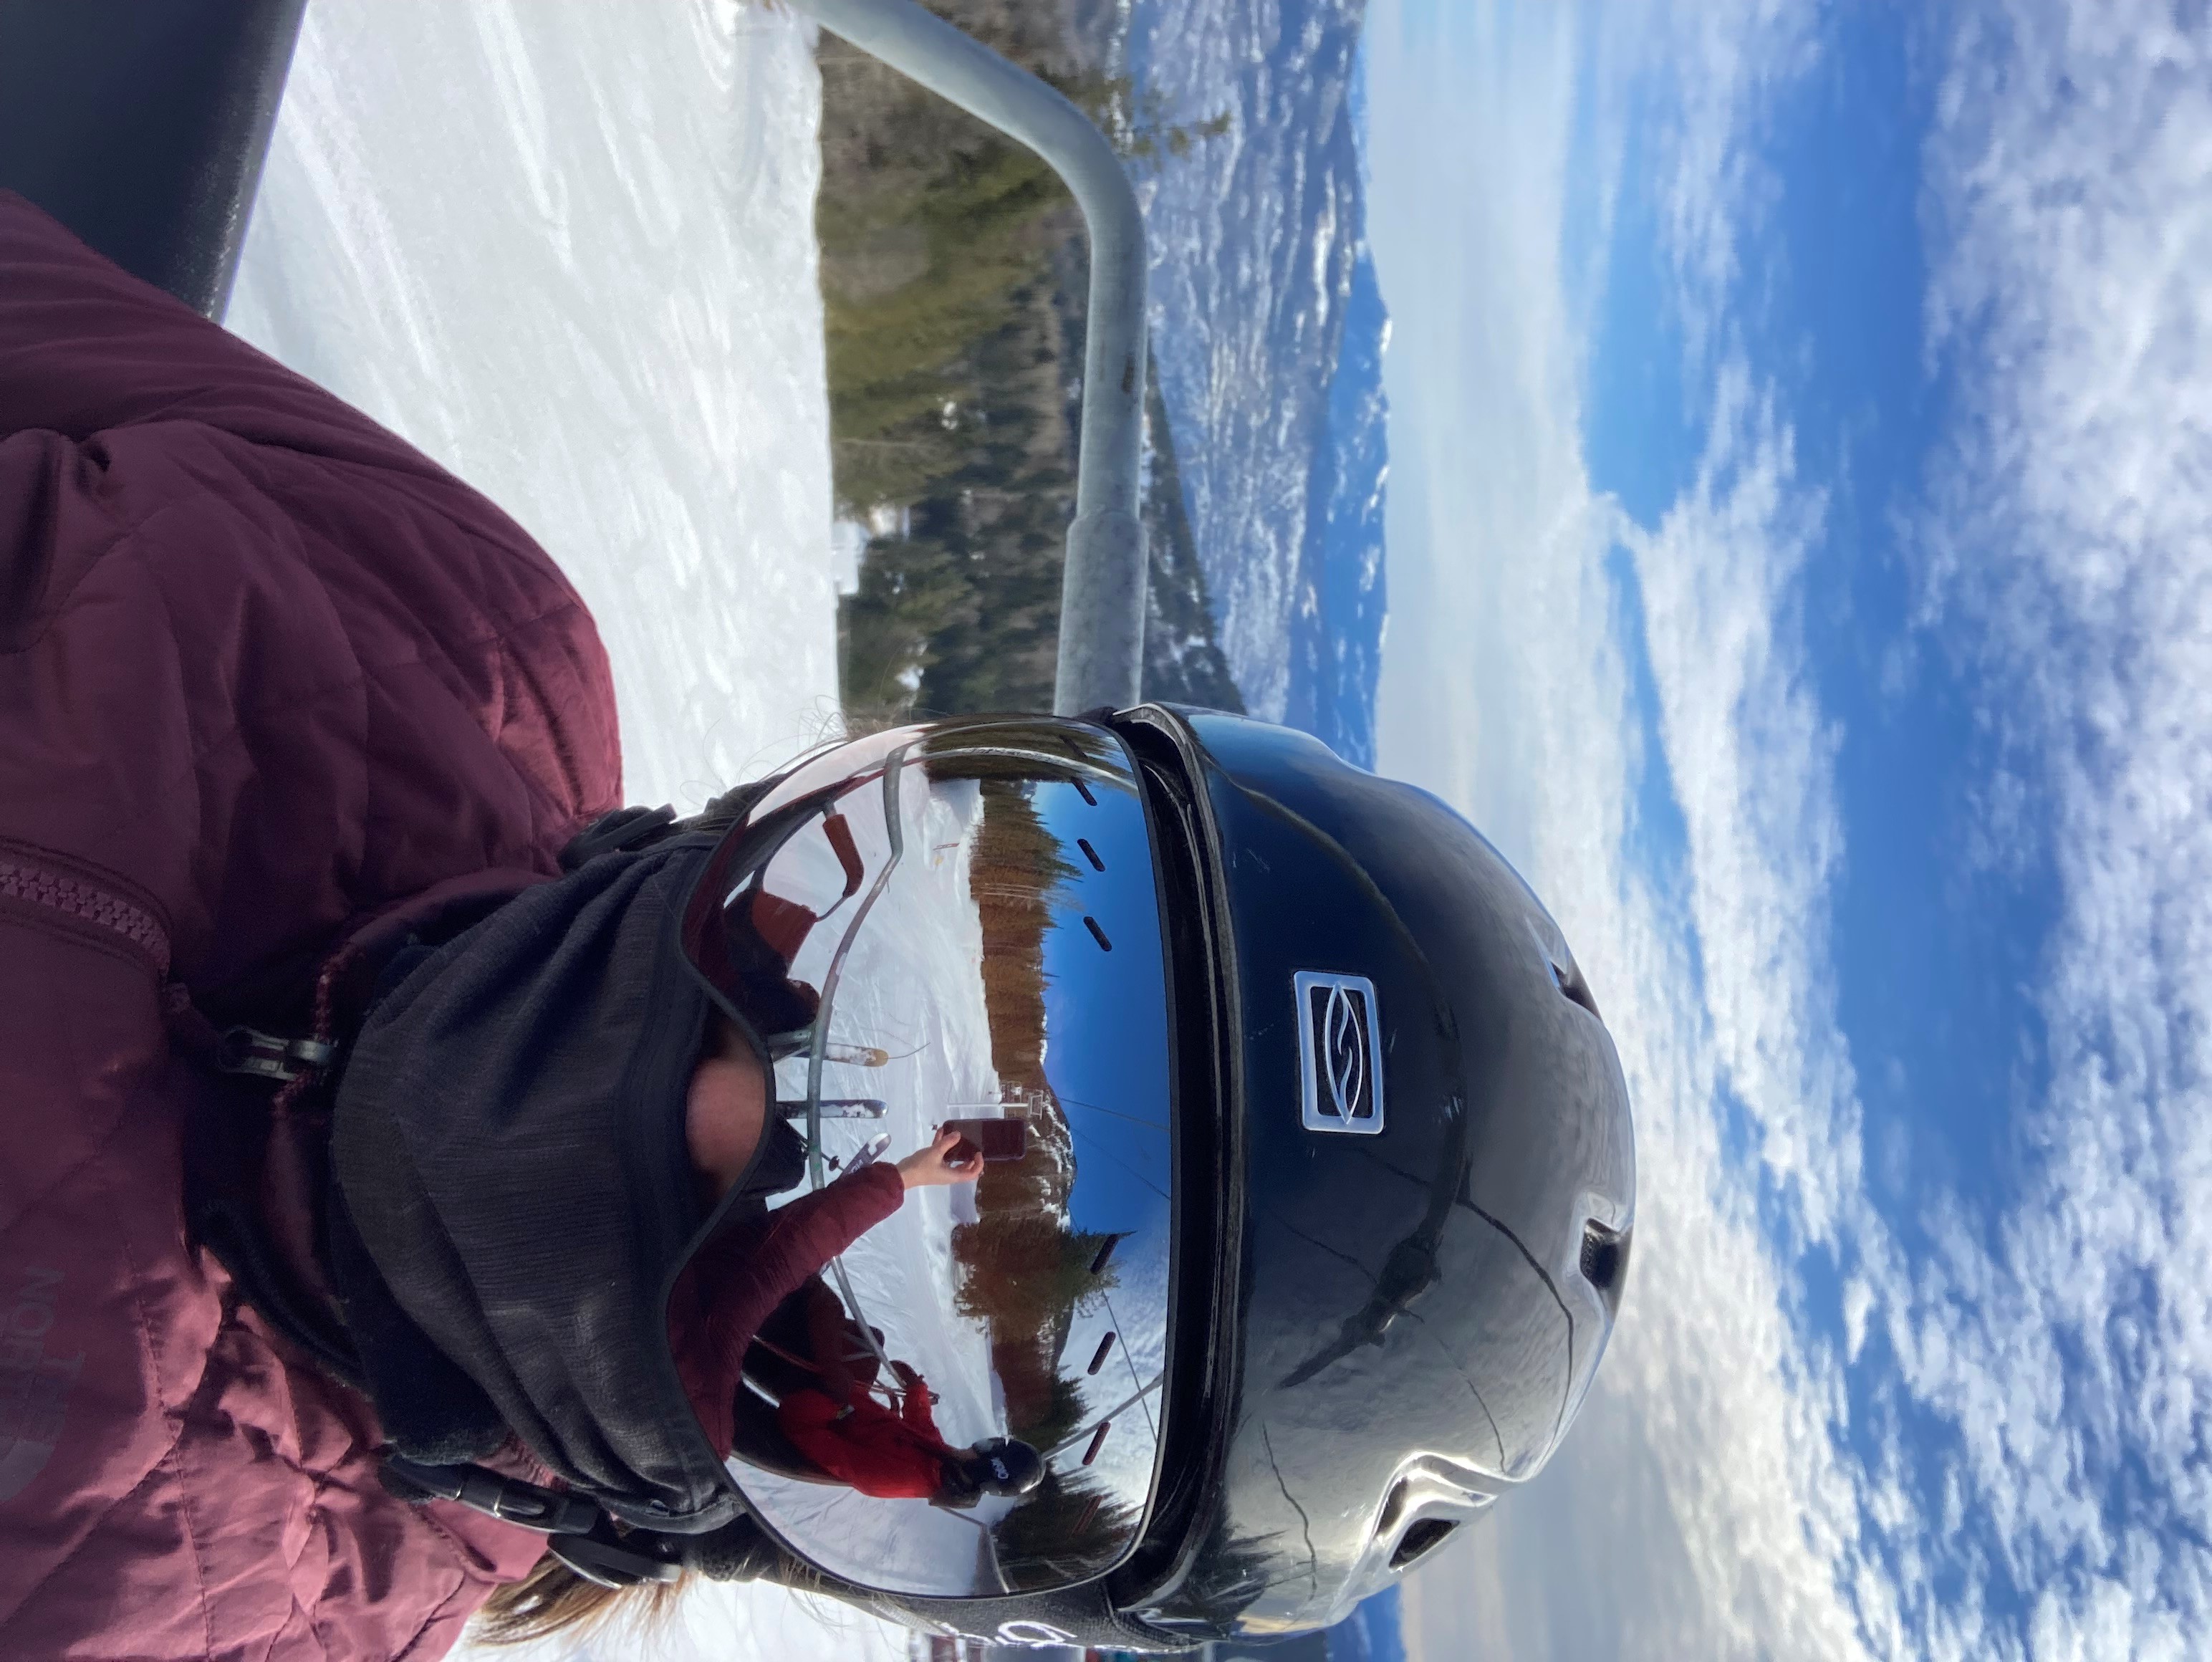 A person in skiing gear takes a selfie while on a chair lift.